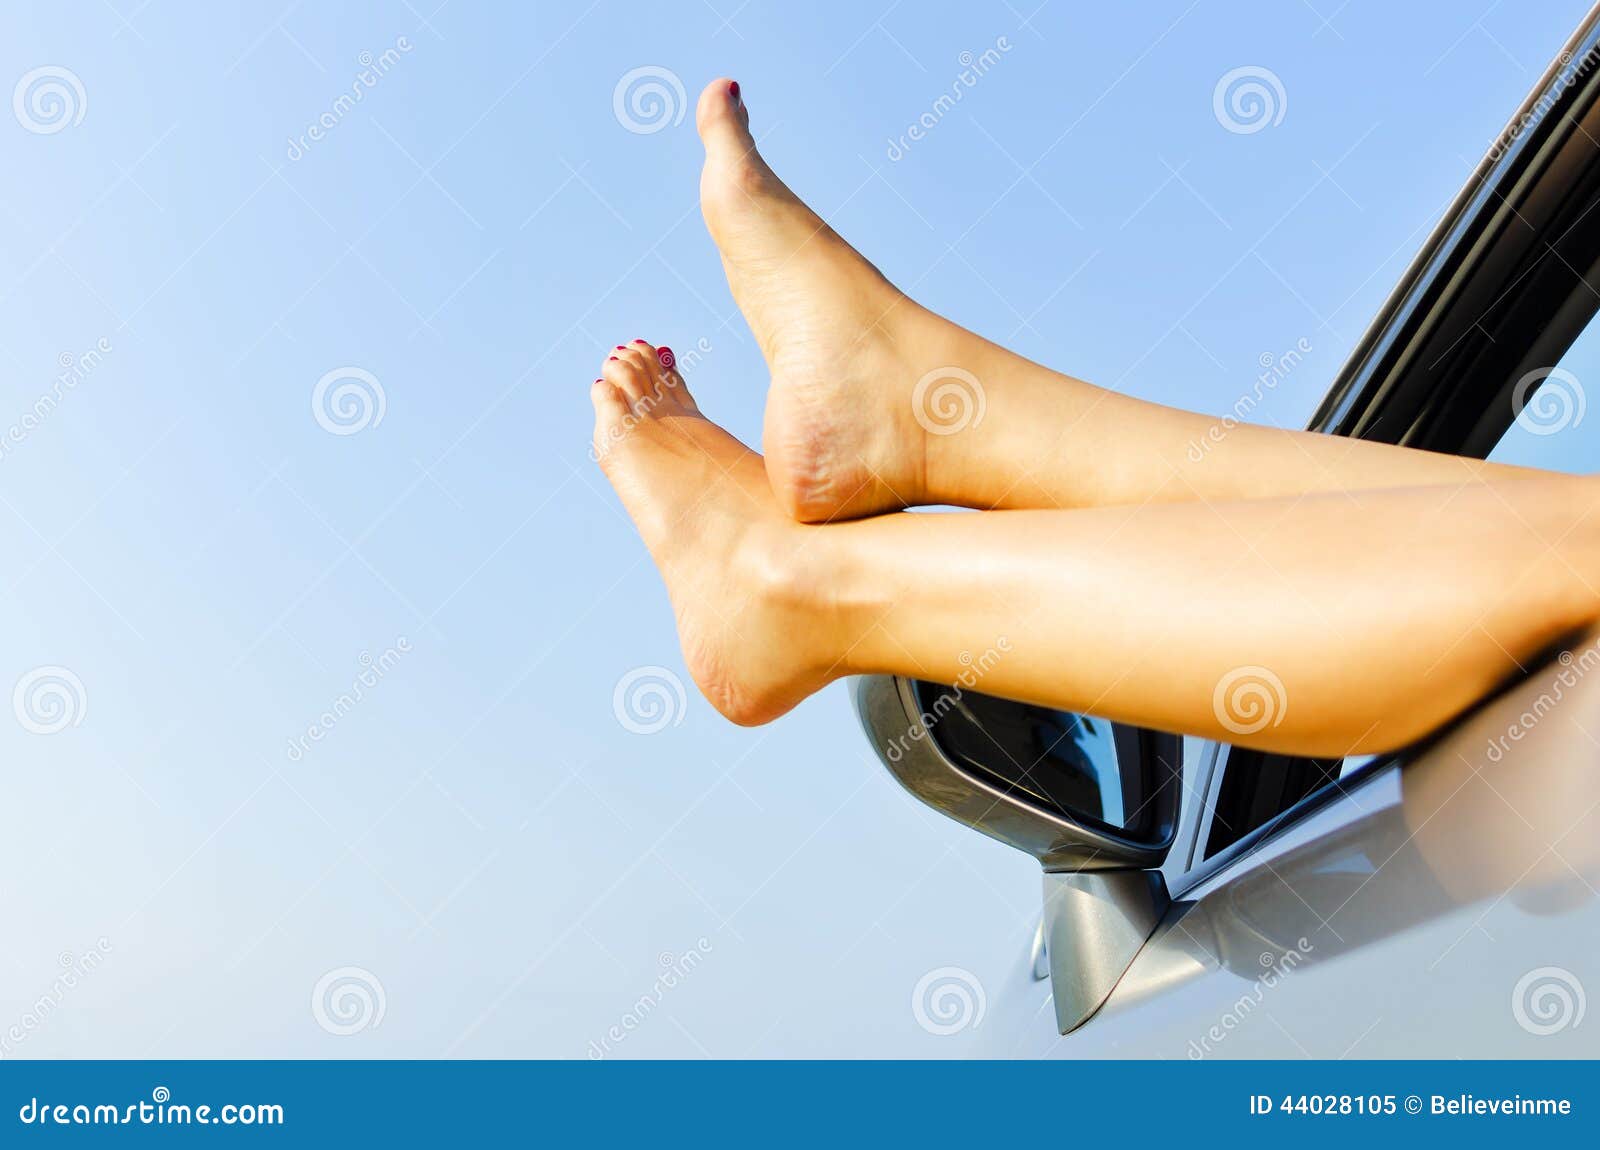 Feet From The Window Of A Car Stock Photo Image 4